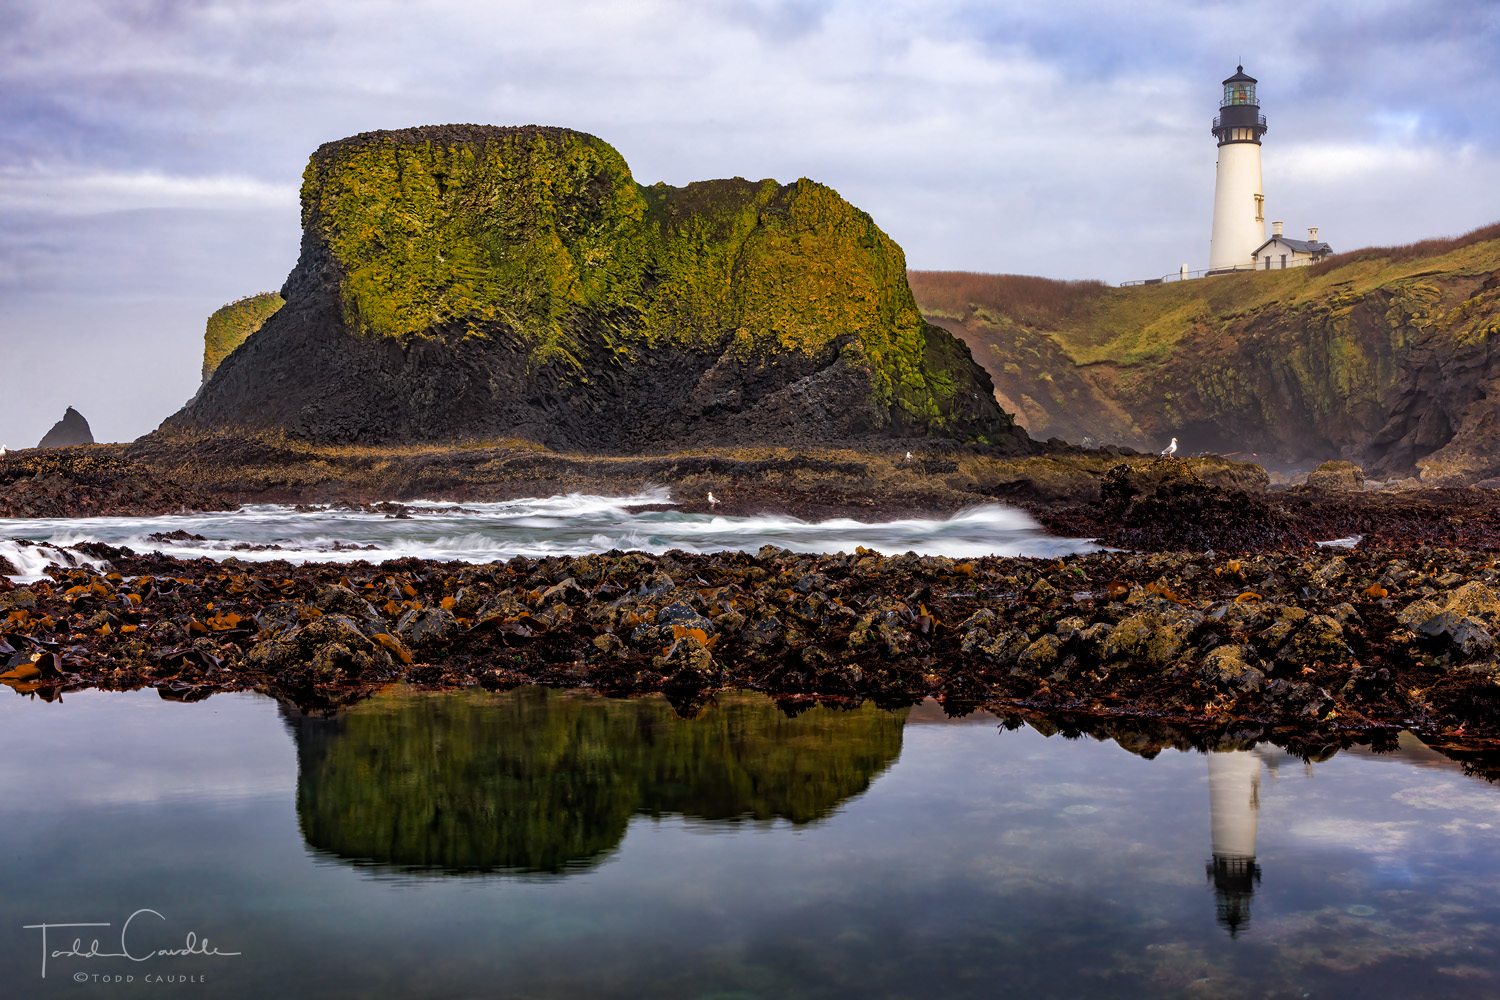 The Yaquina Head Lighthouse reflects in a tidepool at minus tide at the Yaquina Head Outstanding Natural Area.